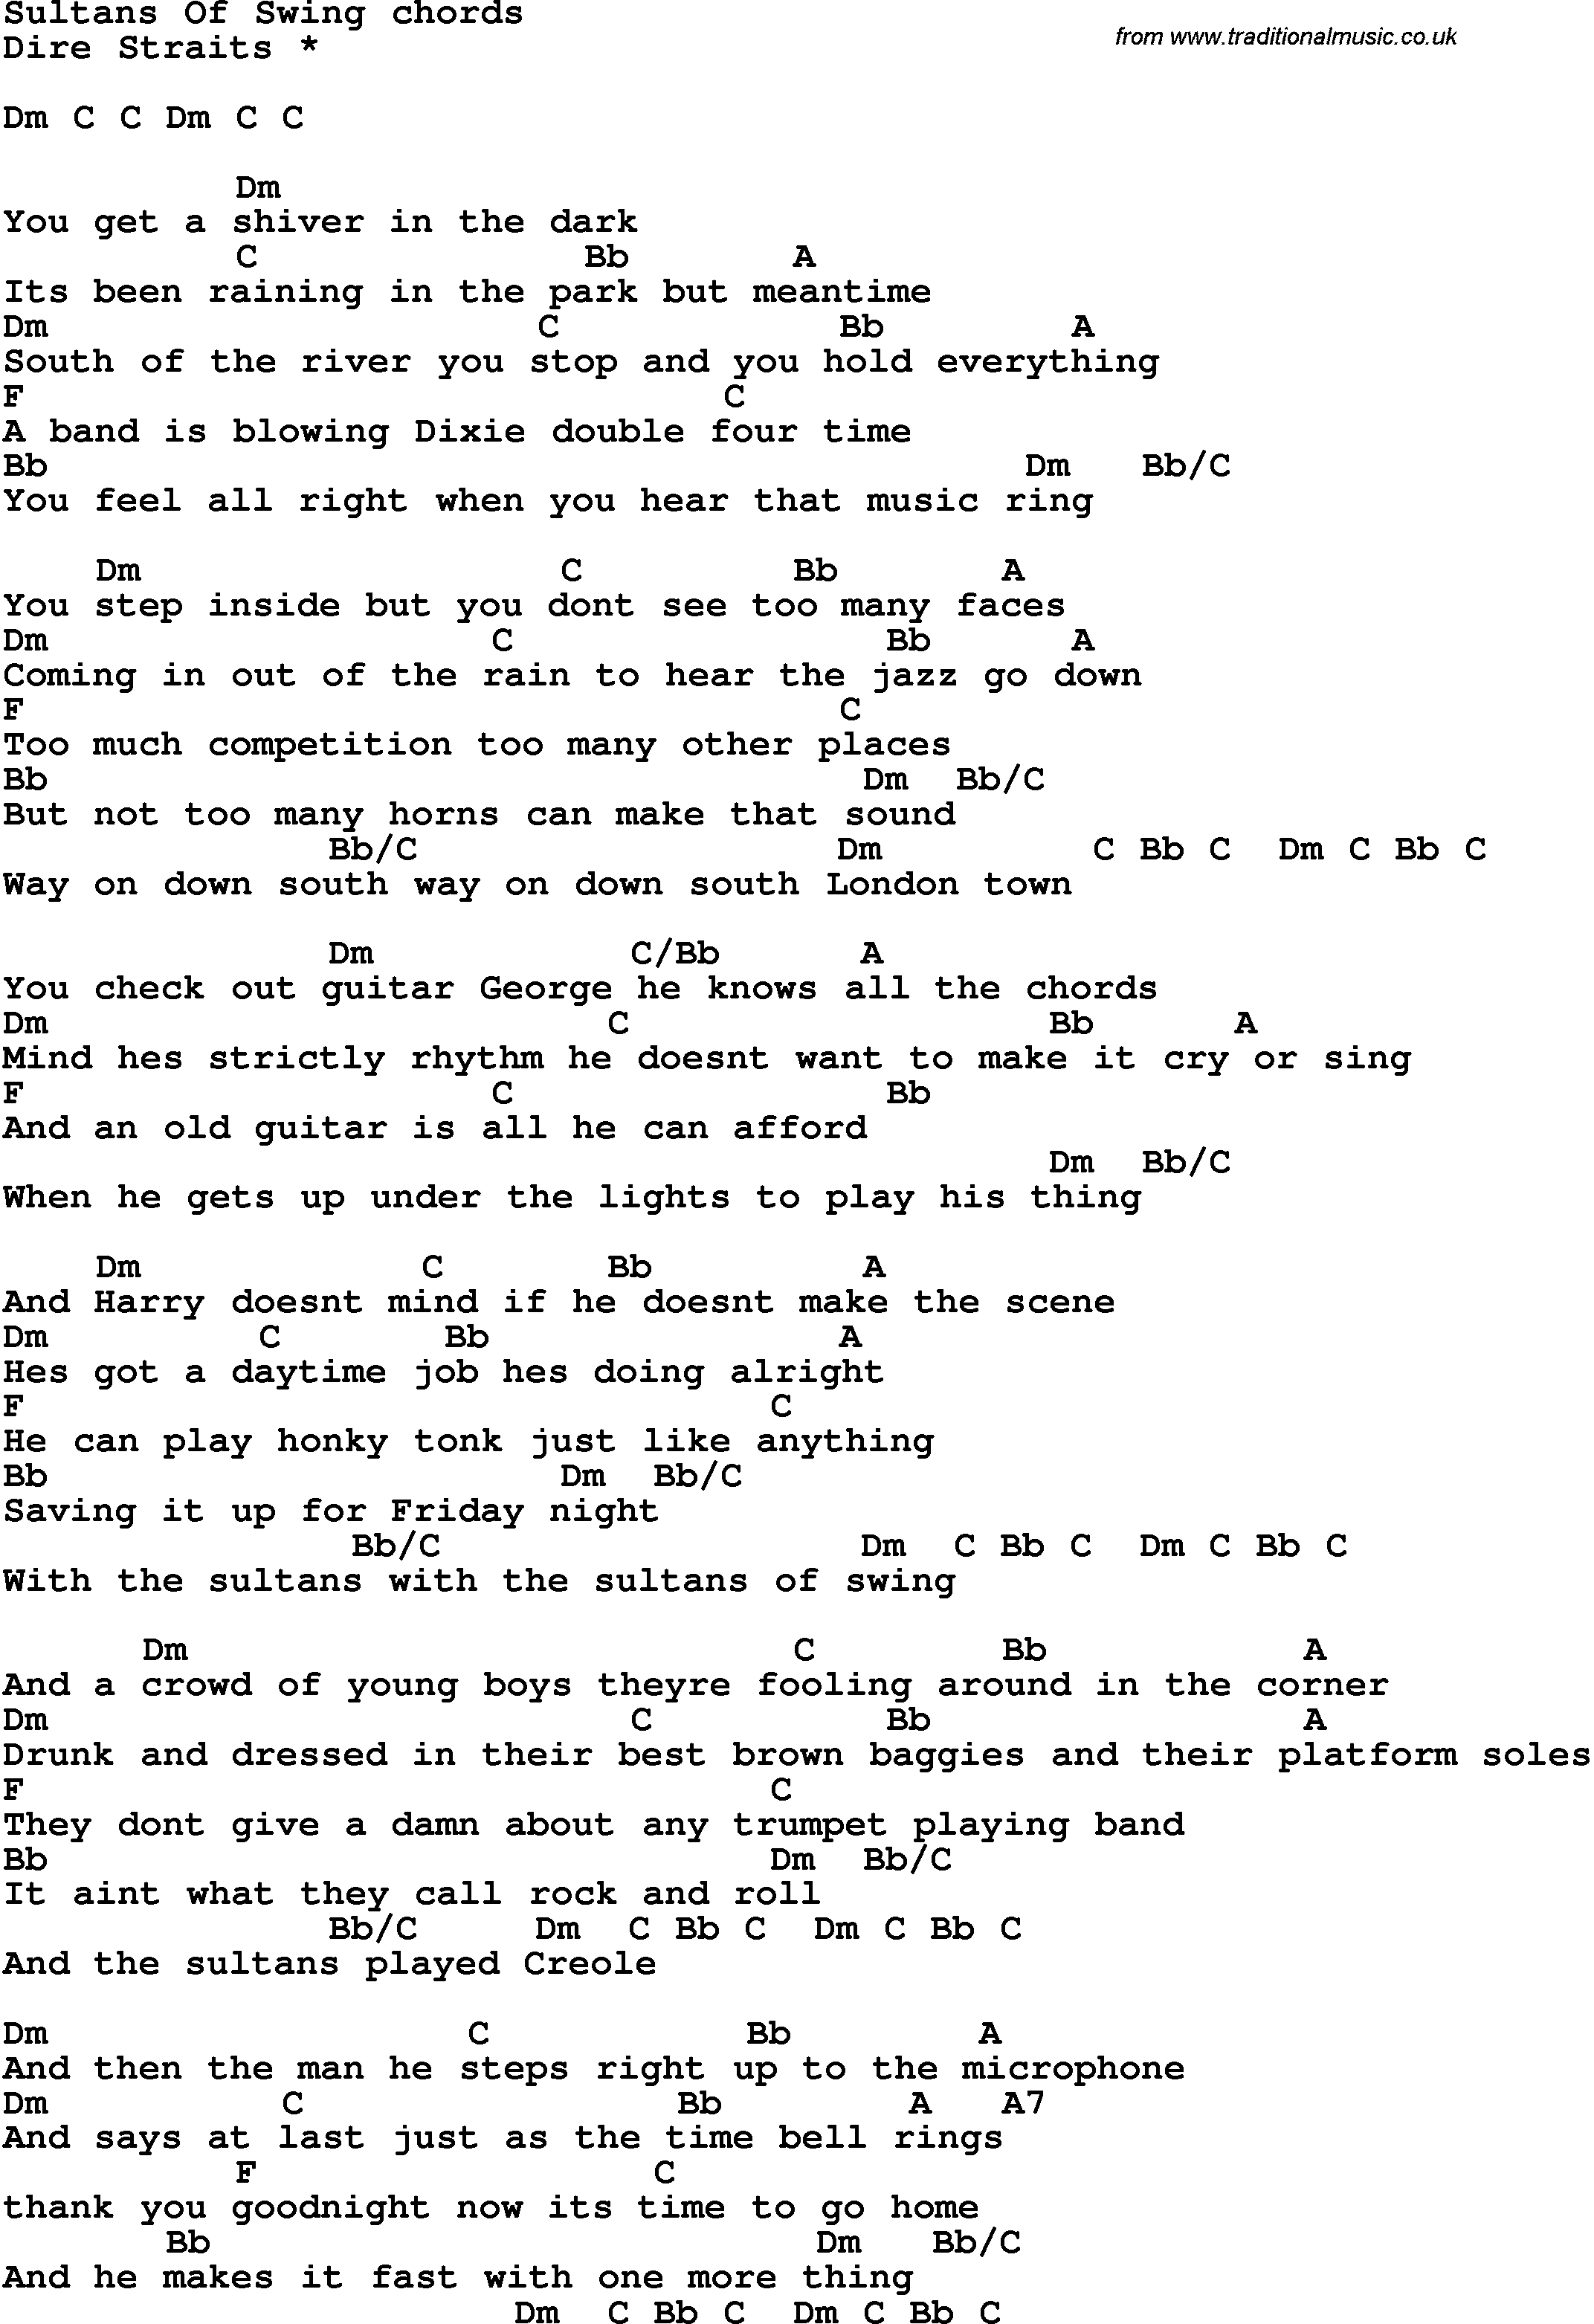 Song Lyrics with guitar chords for Sultans Of Swing - Dire Straits